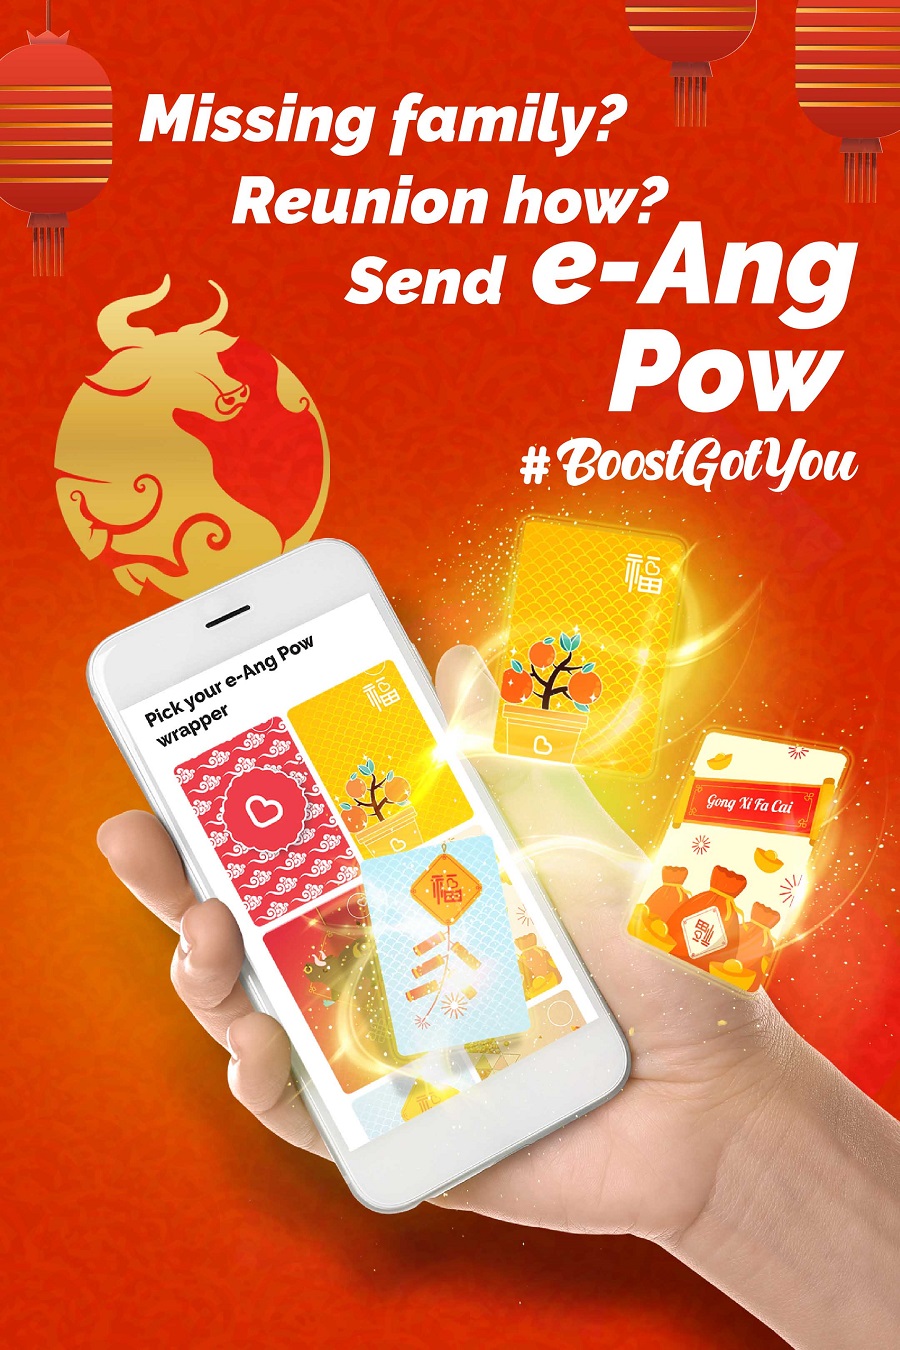 Boost E-Wallet Brings Back e-Ang Pows In Time For Chinese New Year 2021